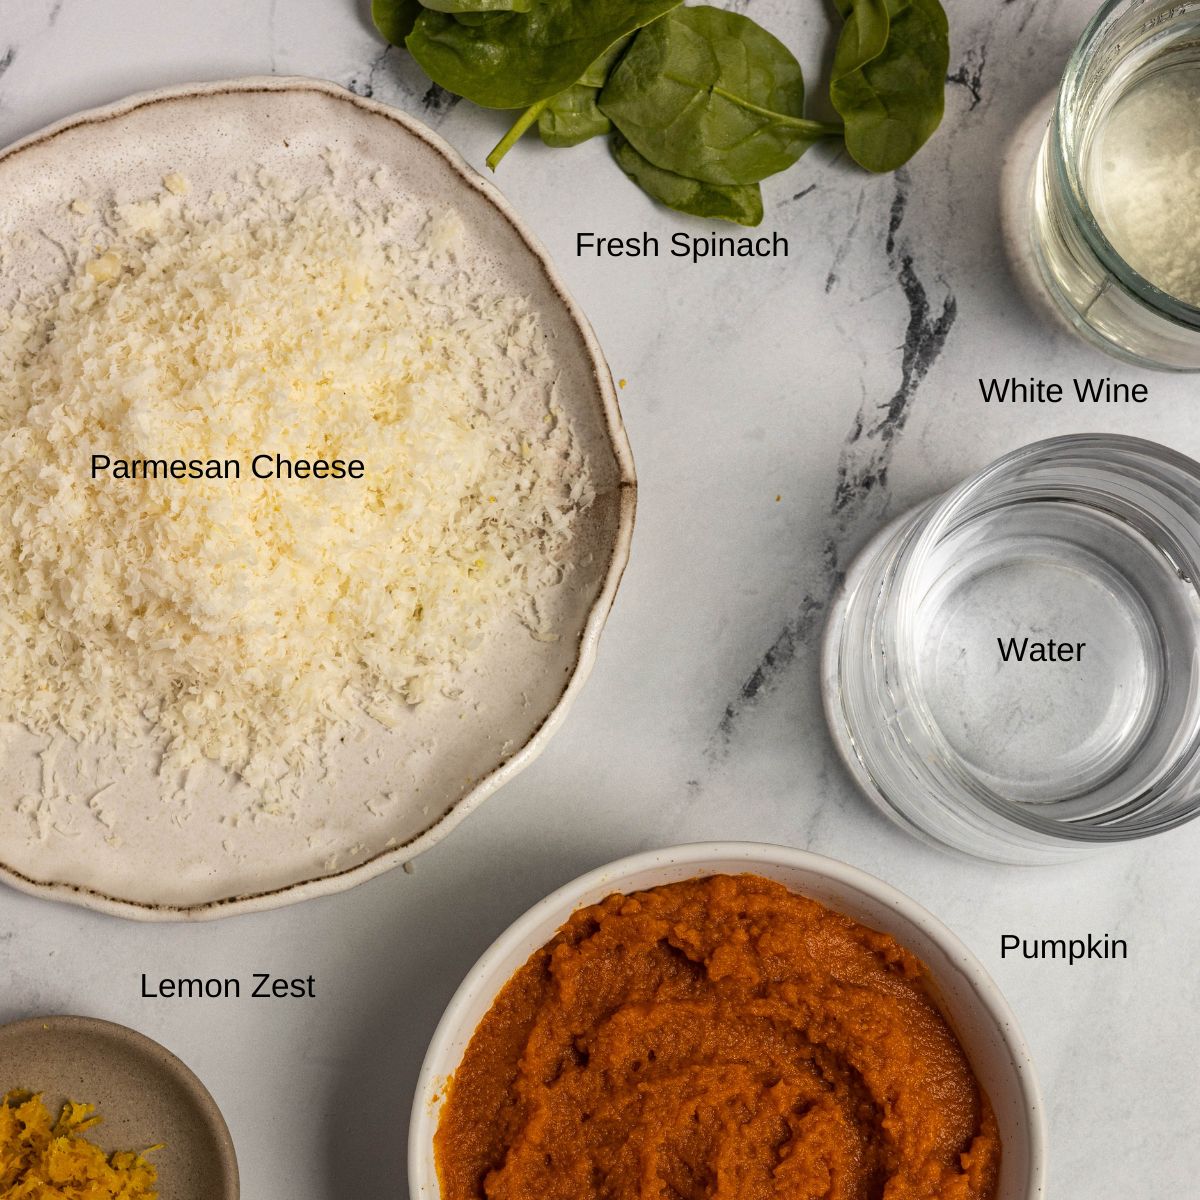 Ingredient image for Pumpkin and Mushroom Risotto. Shows fresh spinach, grated parmesan cheese, white wine, water, pumpkin, and lemon zest.